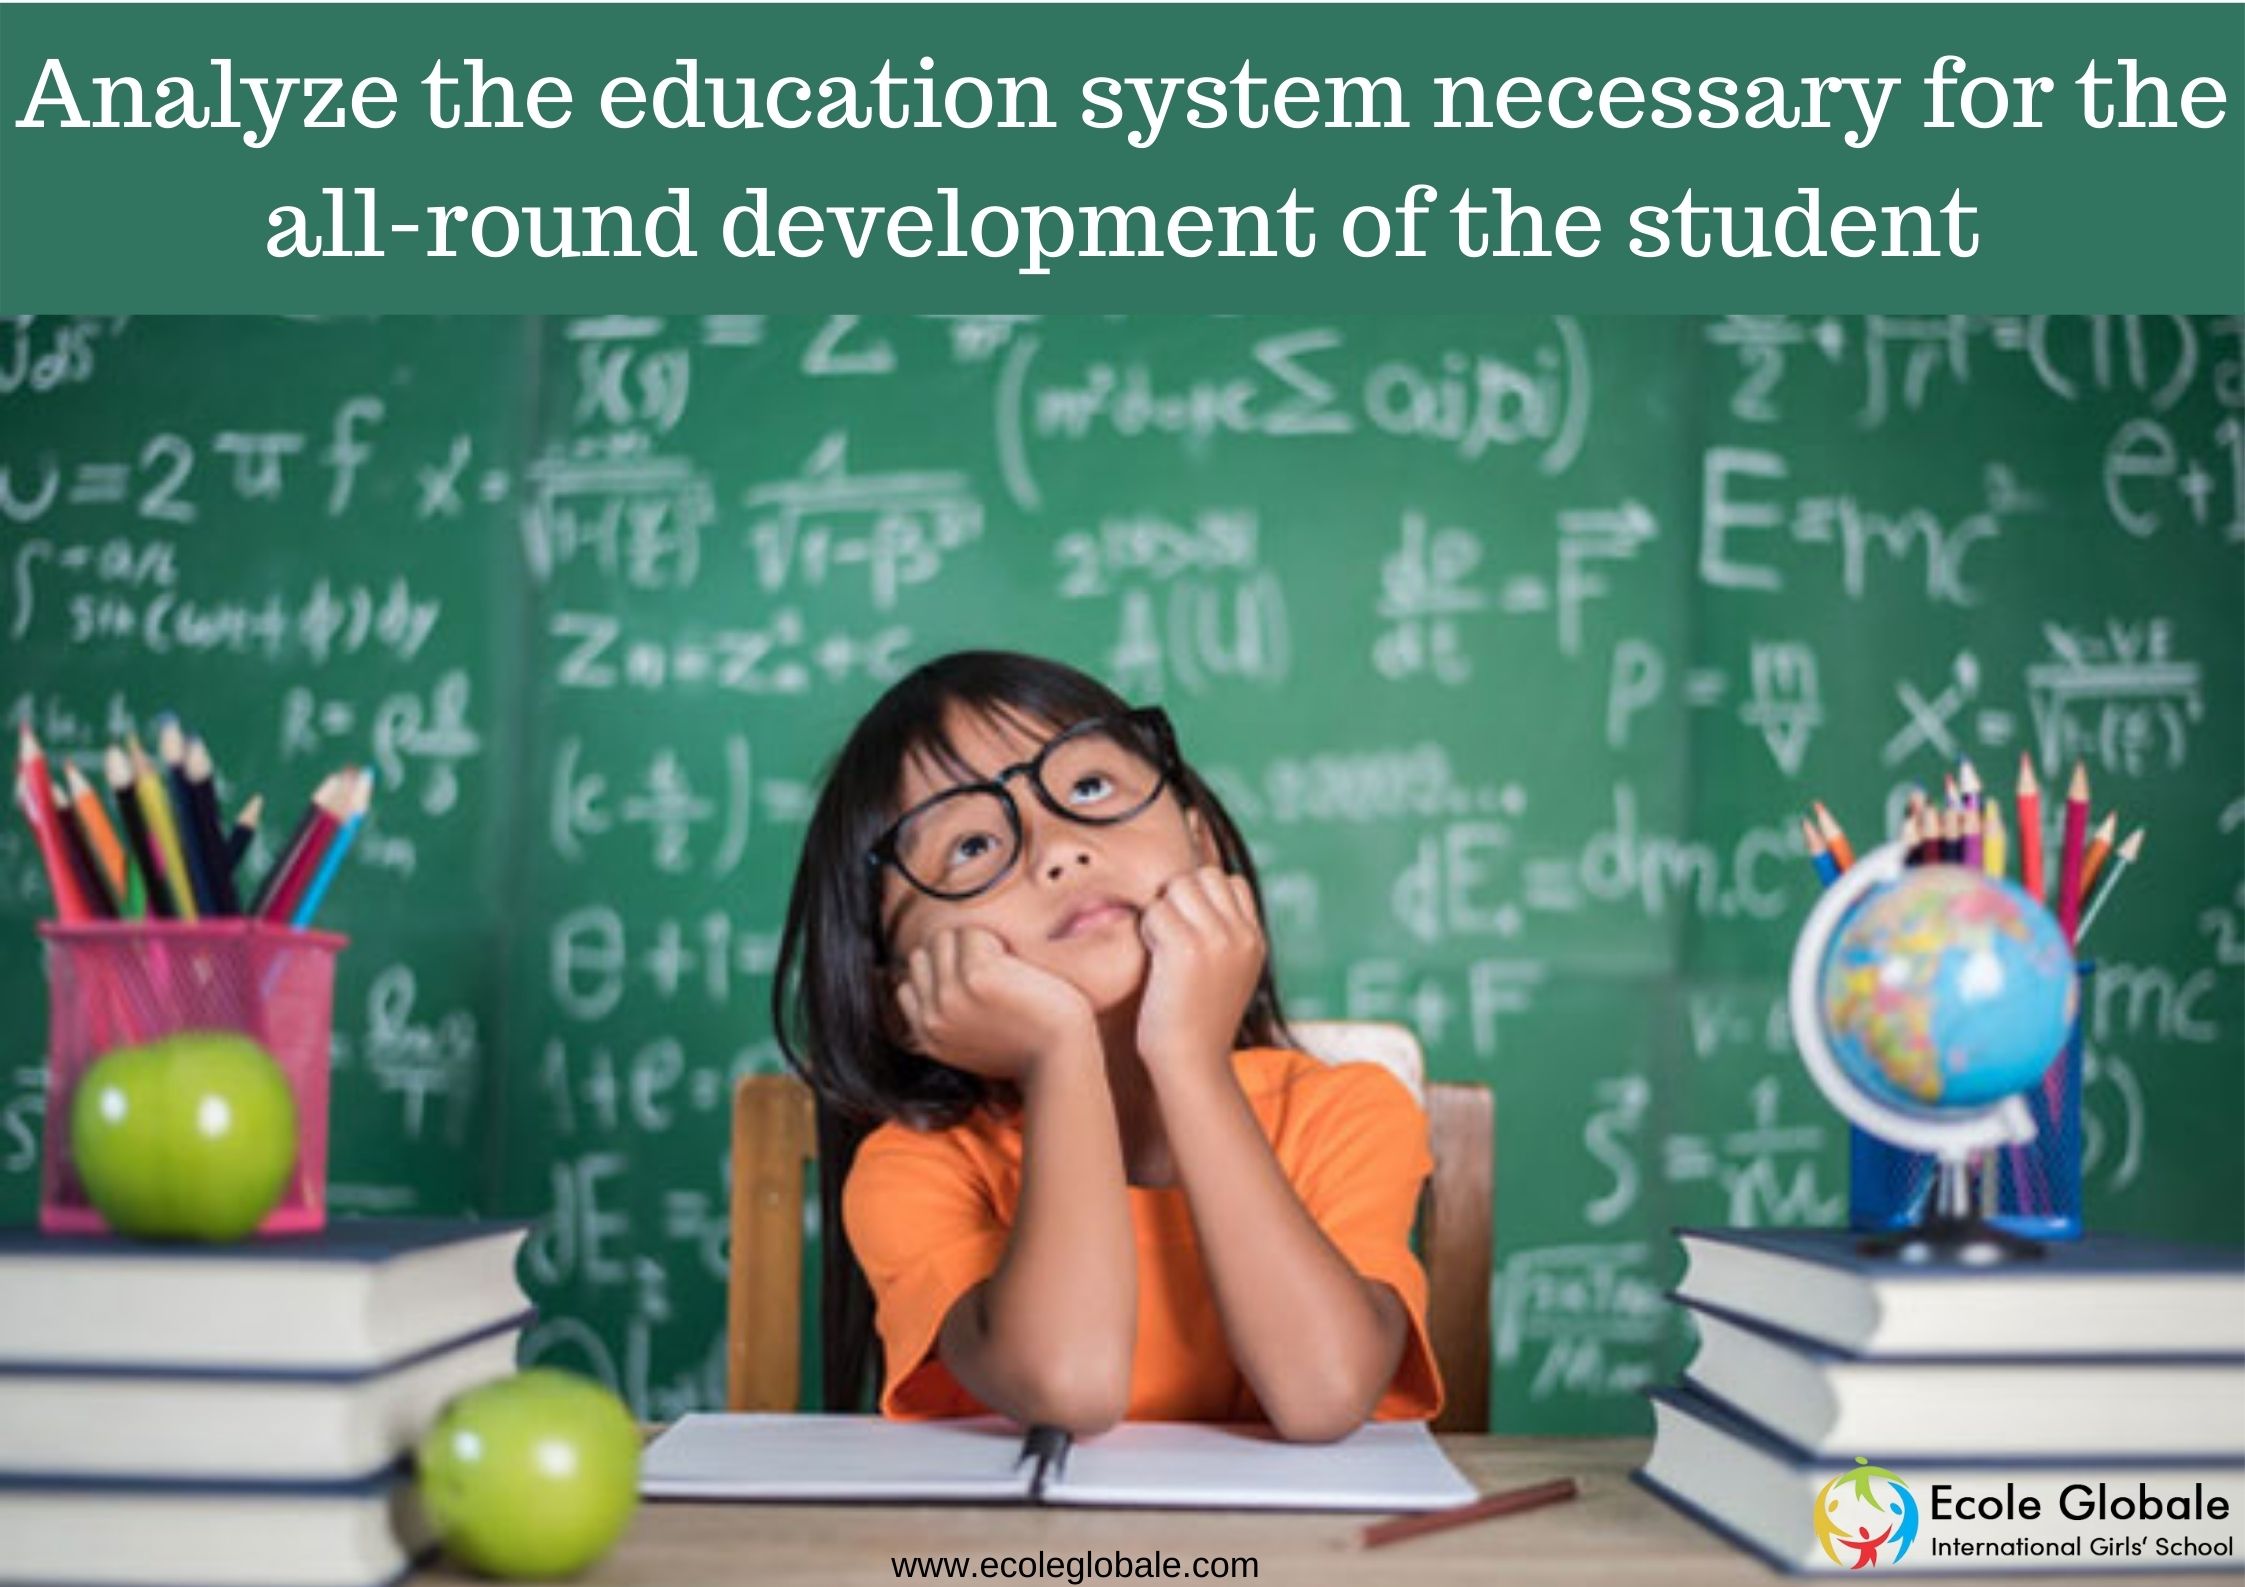 You are currently viewing Analyze the special needs of the education system necessary for the all-round development of the student